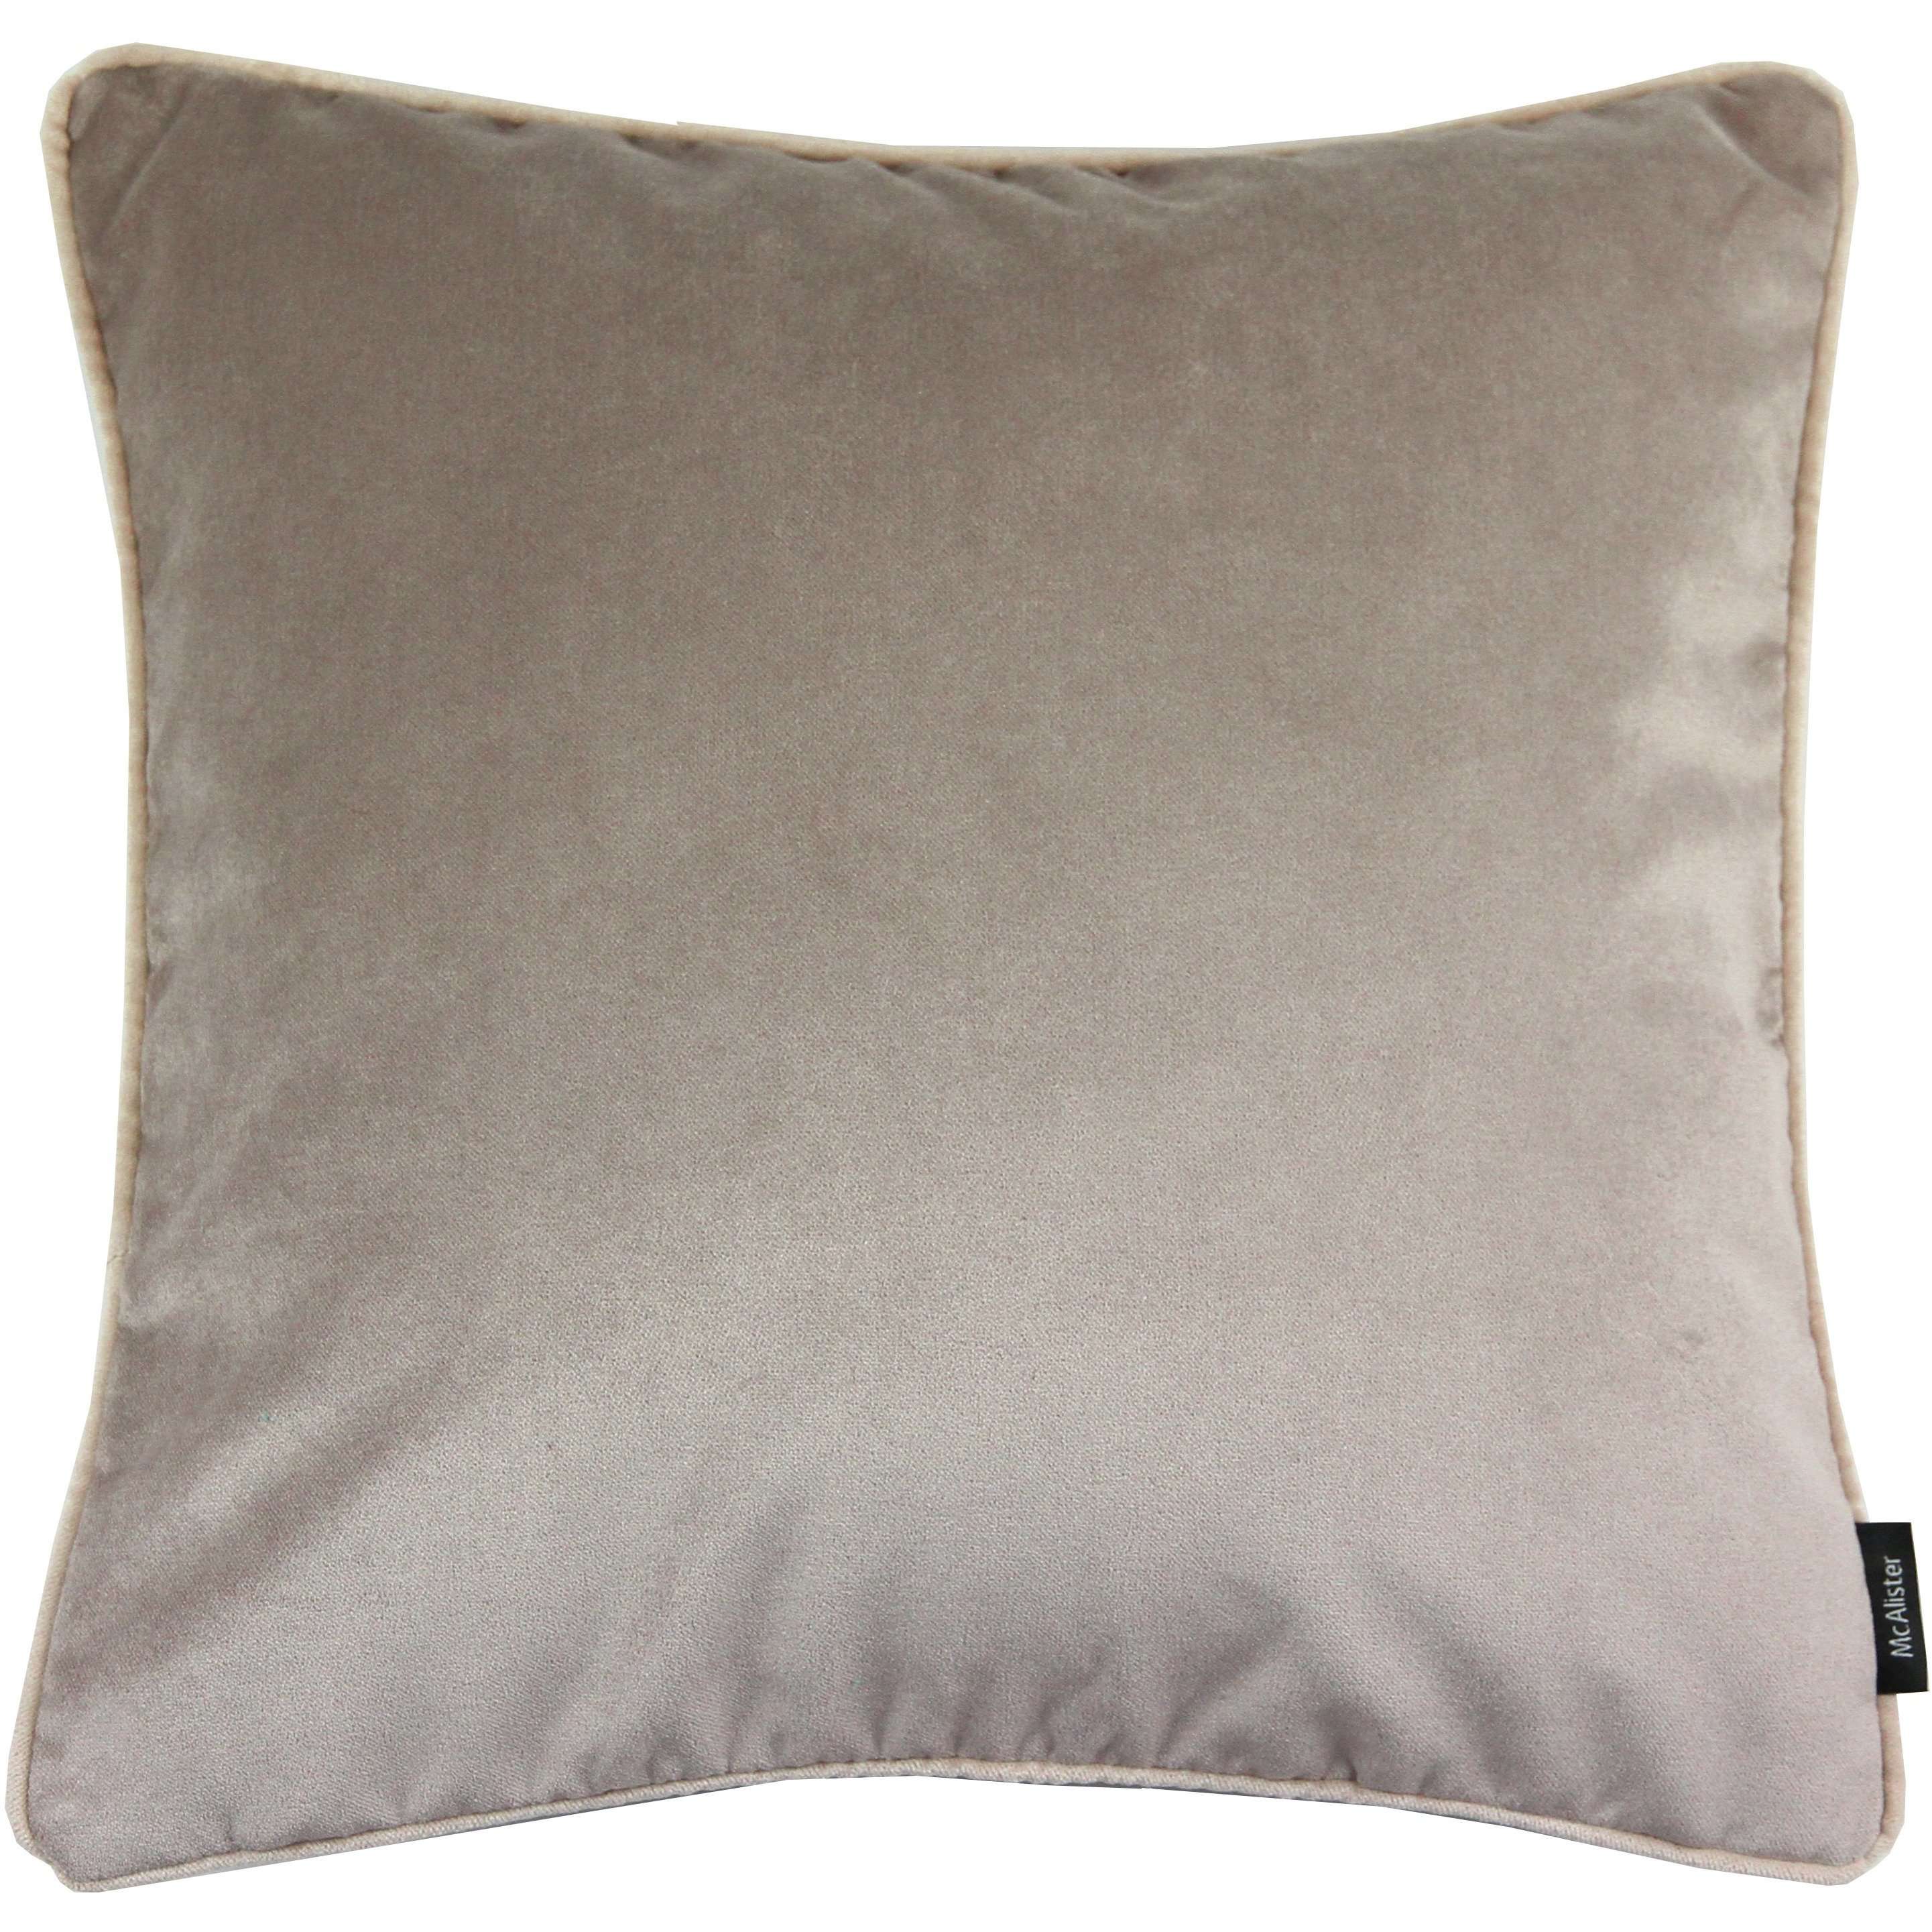 McAlister Textiles Matt Beige Mink Piped Velvet Cushion Cushions and Covers Cover Only 43cm x 43cm 